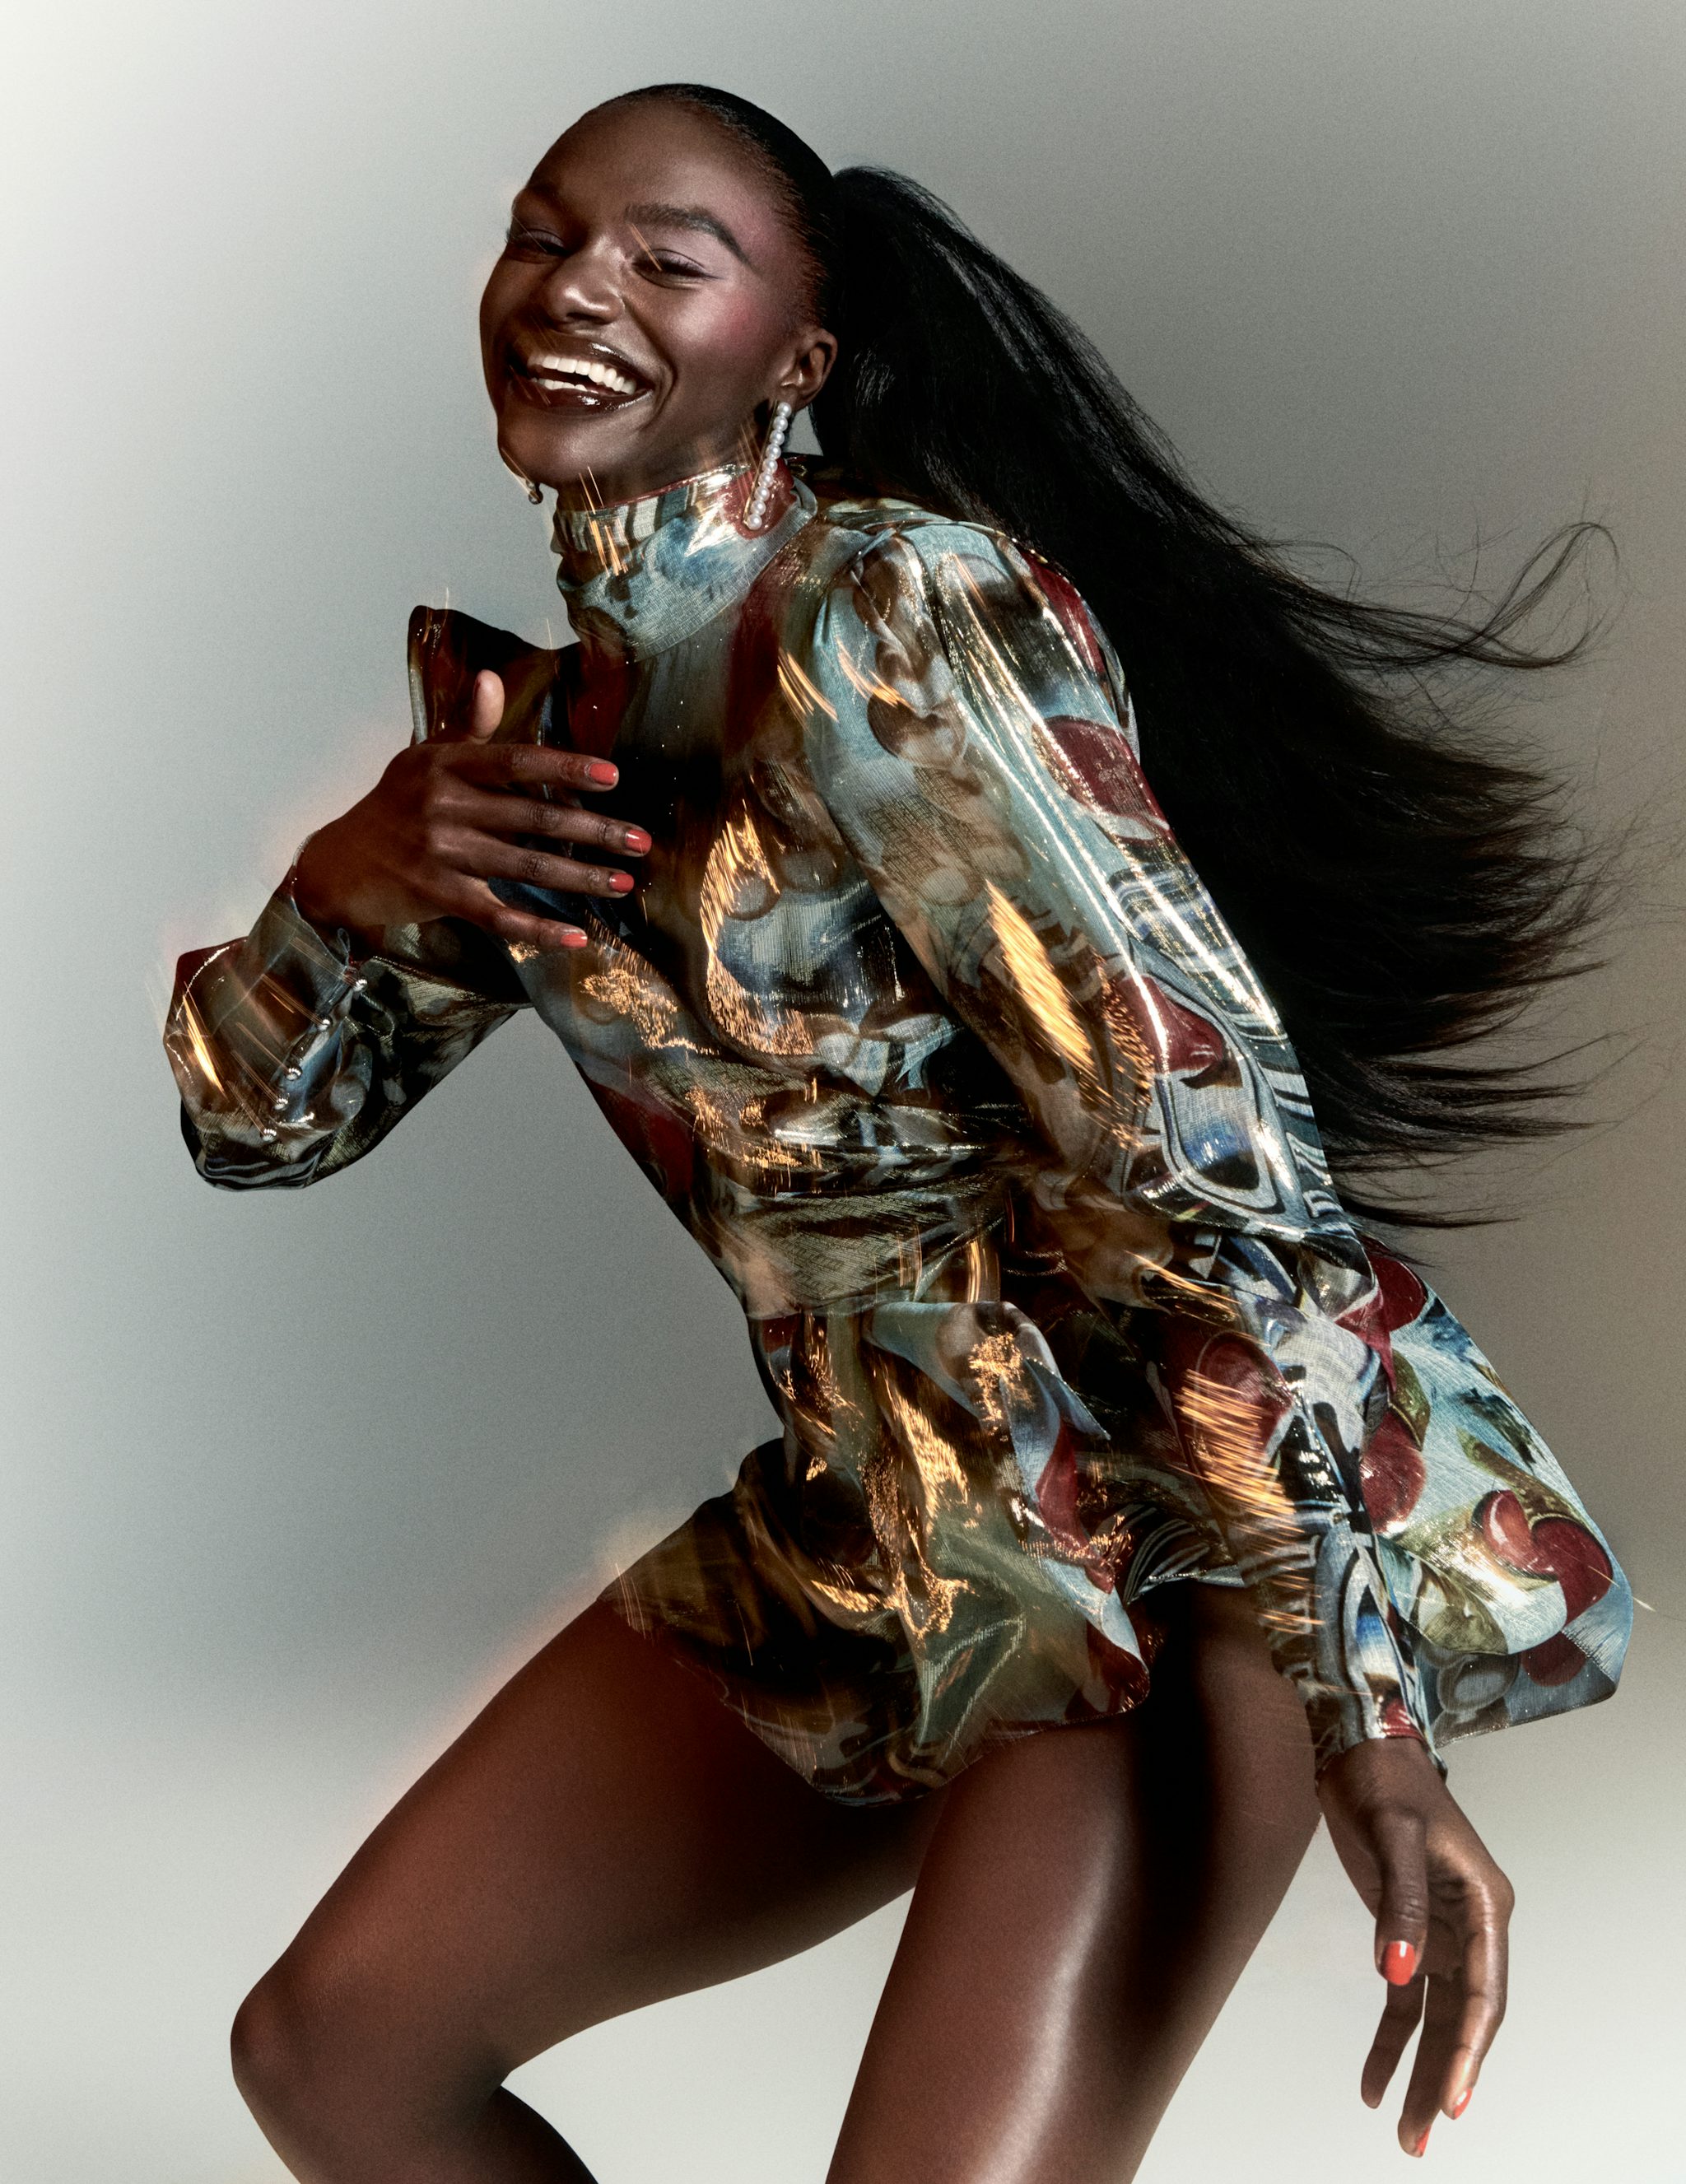 Let the Games Begin, Dina Asher-Smith British Vogue Charlotte Wales 2024